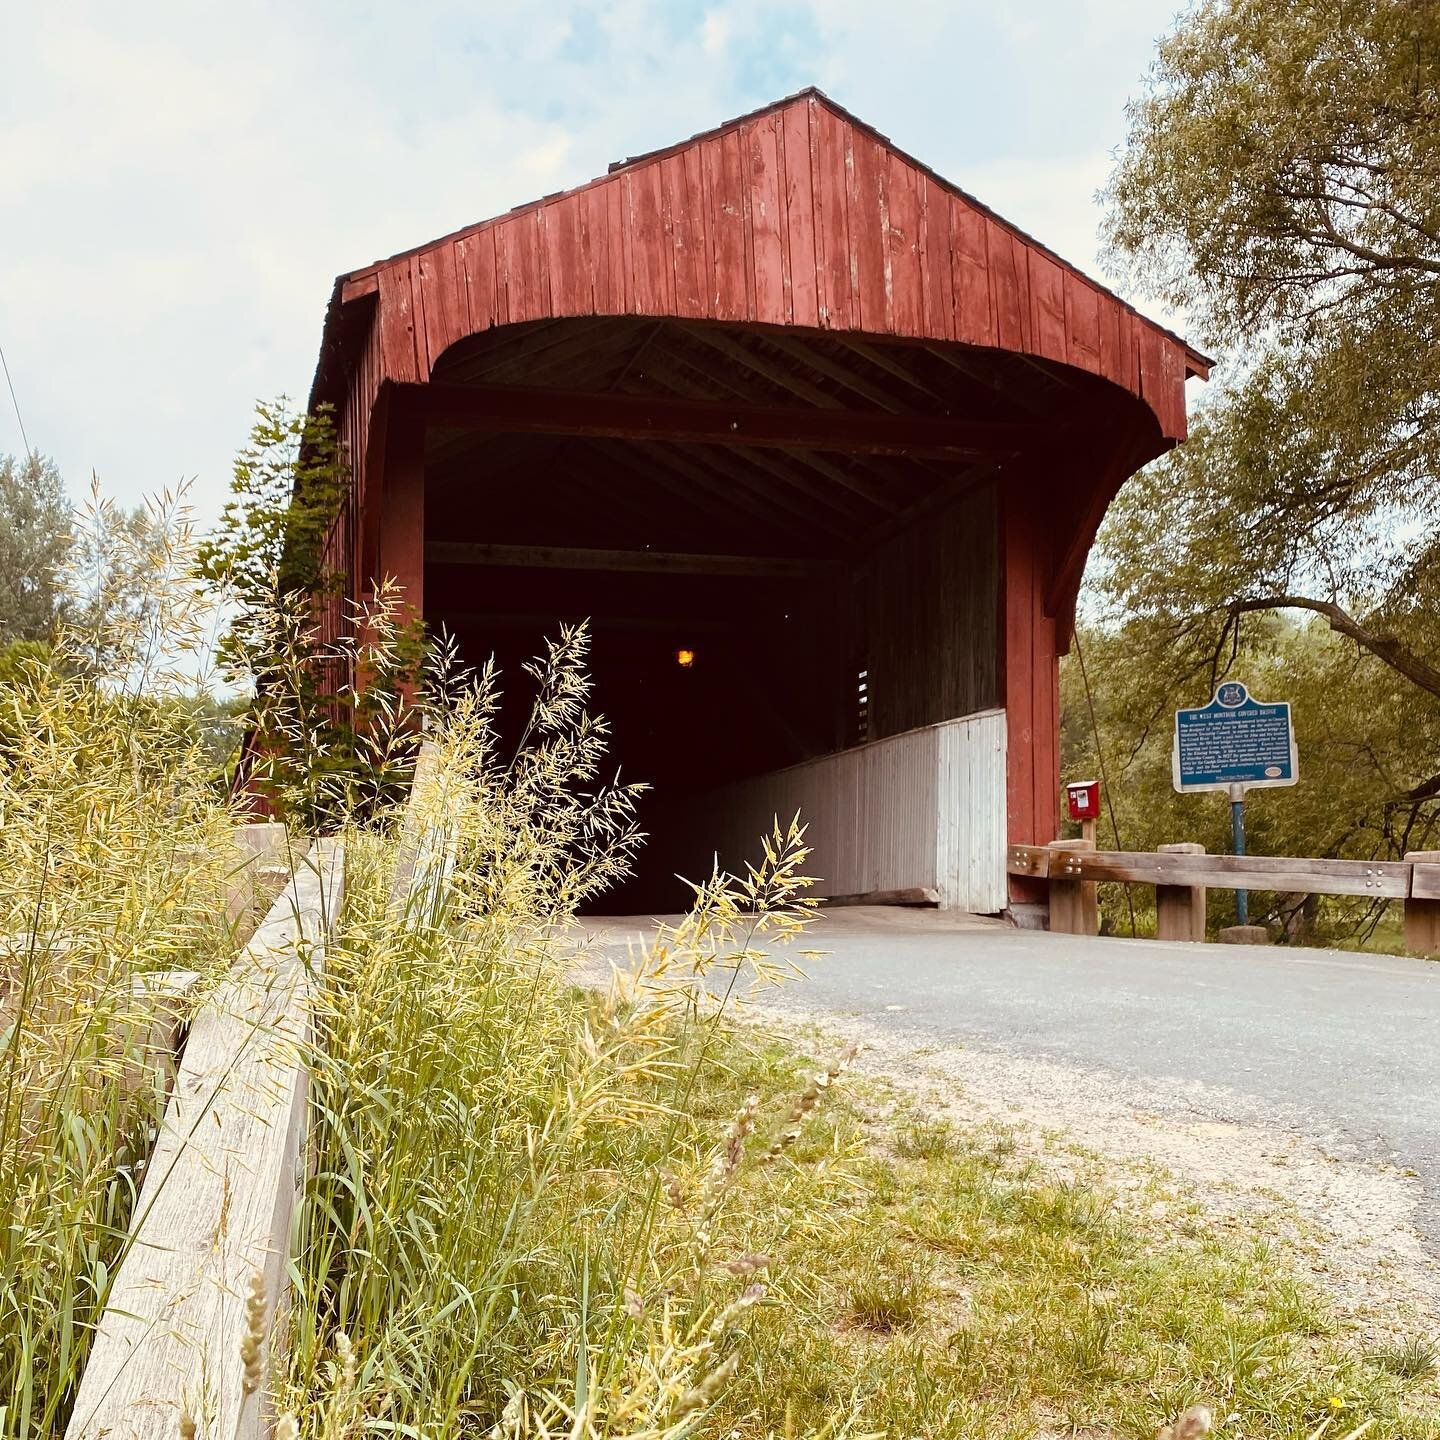 Took my gal to the Kissing Bridge. It's the last remaining covered bridge in Ontario and was built in 1880. 
.
.
.
.
.
#travelphotographer #travelontario #ontariotravel #ontario #redcoveredbridge #coveredbridge #siteseeing #countrylife #outinthecount